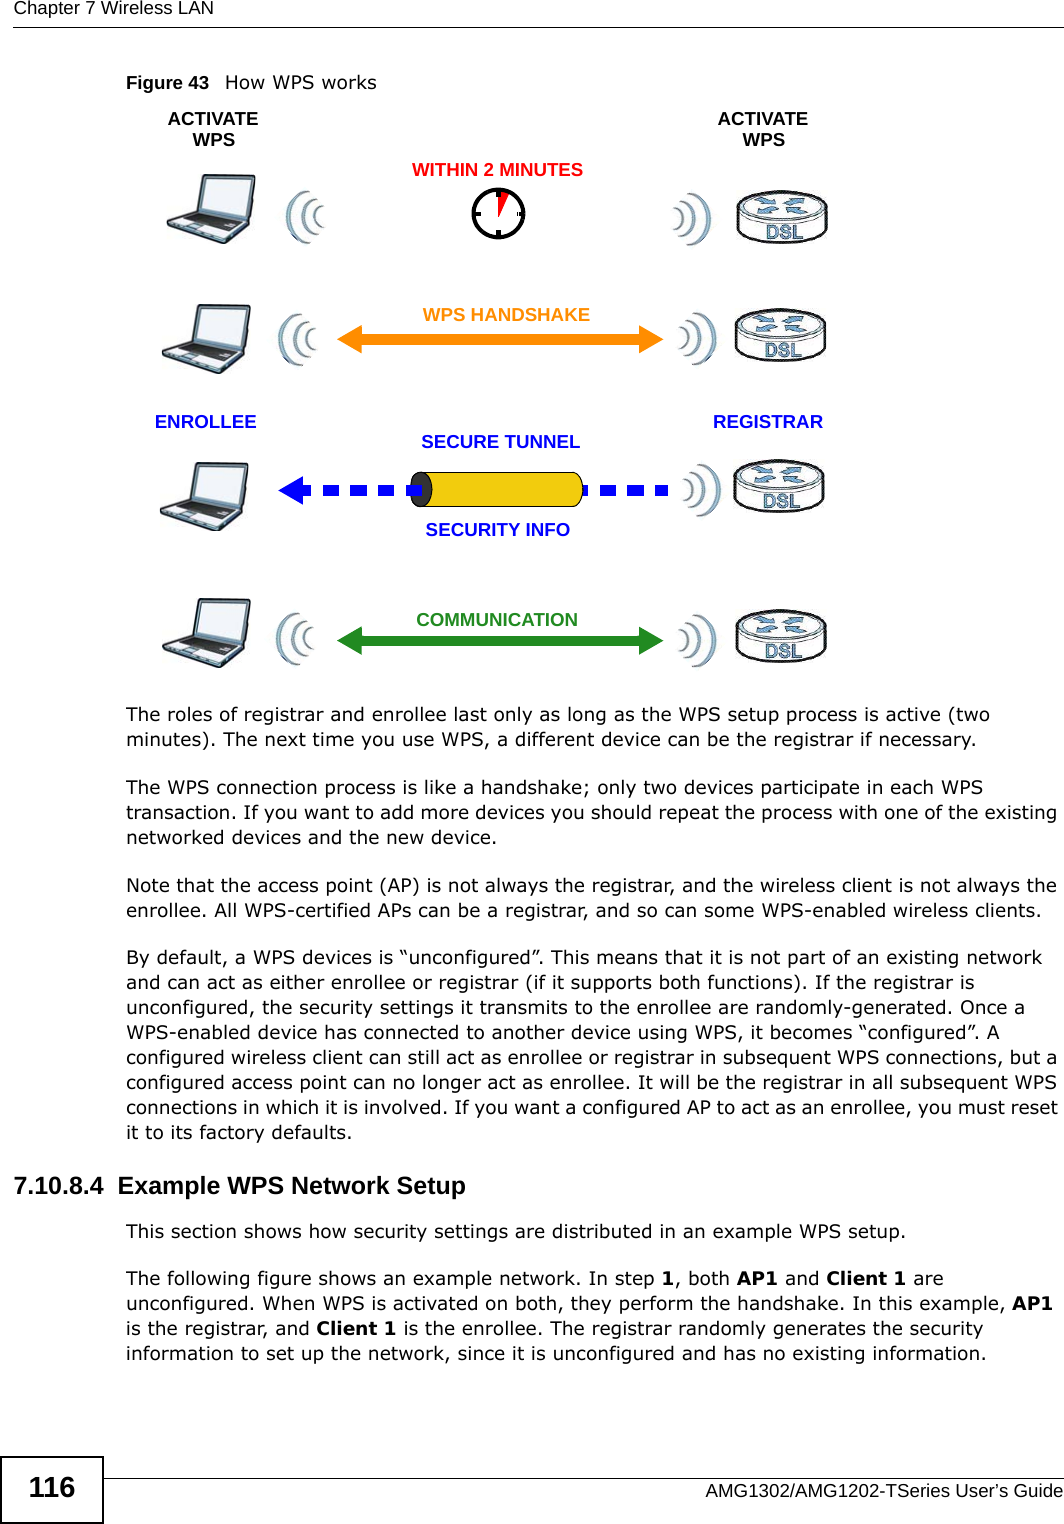 Chapter 7 Wireless LANAMG1302/AMG1202-TSeries User’s Guide116Figure 43   How WPS worksThe roles of registrar and enrollee last only as long as the WPS setup process is active (two minutes). The next time you use WPS, a different device can be the registrar if necessary.The WPS connection process is like a handshake; only two devices participate in each WPS transaction. If you want to add more devices you should repeat the process with one of the existing networked devices and the new device.Note that the access point (AP) is not always the registrar, and the wireless client is not always the enrollee. All WPS-certified APs can be a registrar, and so can some WPS-enabled wireless clients.By default, a WPS devices is “unconfigured”. This means that it is not part of an existing network and can act as either enrollee or registrar (if it supports both functions). If the registrar is unconfigured, the security settings it transmits to the enrollee are randomly-generated. Once a WPS-enabled device has connected to another device using WPS, it becomes “configured”. A configured wireless client can still act as enrollee or registrar in subsequent WPS connections, but a configured access point can no longer act as enrollee. It will be the registrar in all subsequent WPS connections in which it is involved. If you want a configured AP to act as an enrollee, you must reset it to its factory defaults.7.10.8.4  Example WPS Network SetupThis section shows how security settings are distributed in an example WPS setup.The following figure shows an example network. In step 1, both AP1 and Client 1 are unconfigured. When WPS is activated on both, they perform the handshake. In this example, AP1 is the registrar, and Client 1 is the enrollee. The registrar randomly generates the security information to set up the network, since it is unconfigured and has no existing information.SECURE TUNNELSECURITY INFOWITHIN 2 MINUTESCOMMUNICATIONACTIVATEWPSACTIVATEWPSWPS HANDSHAKEREGISTRARENROLLEE